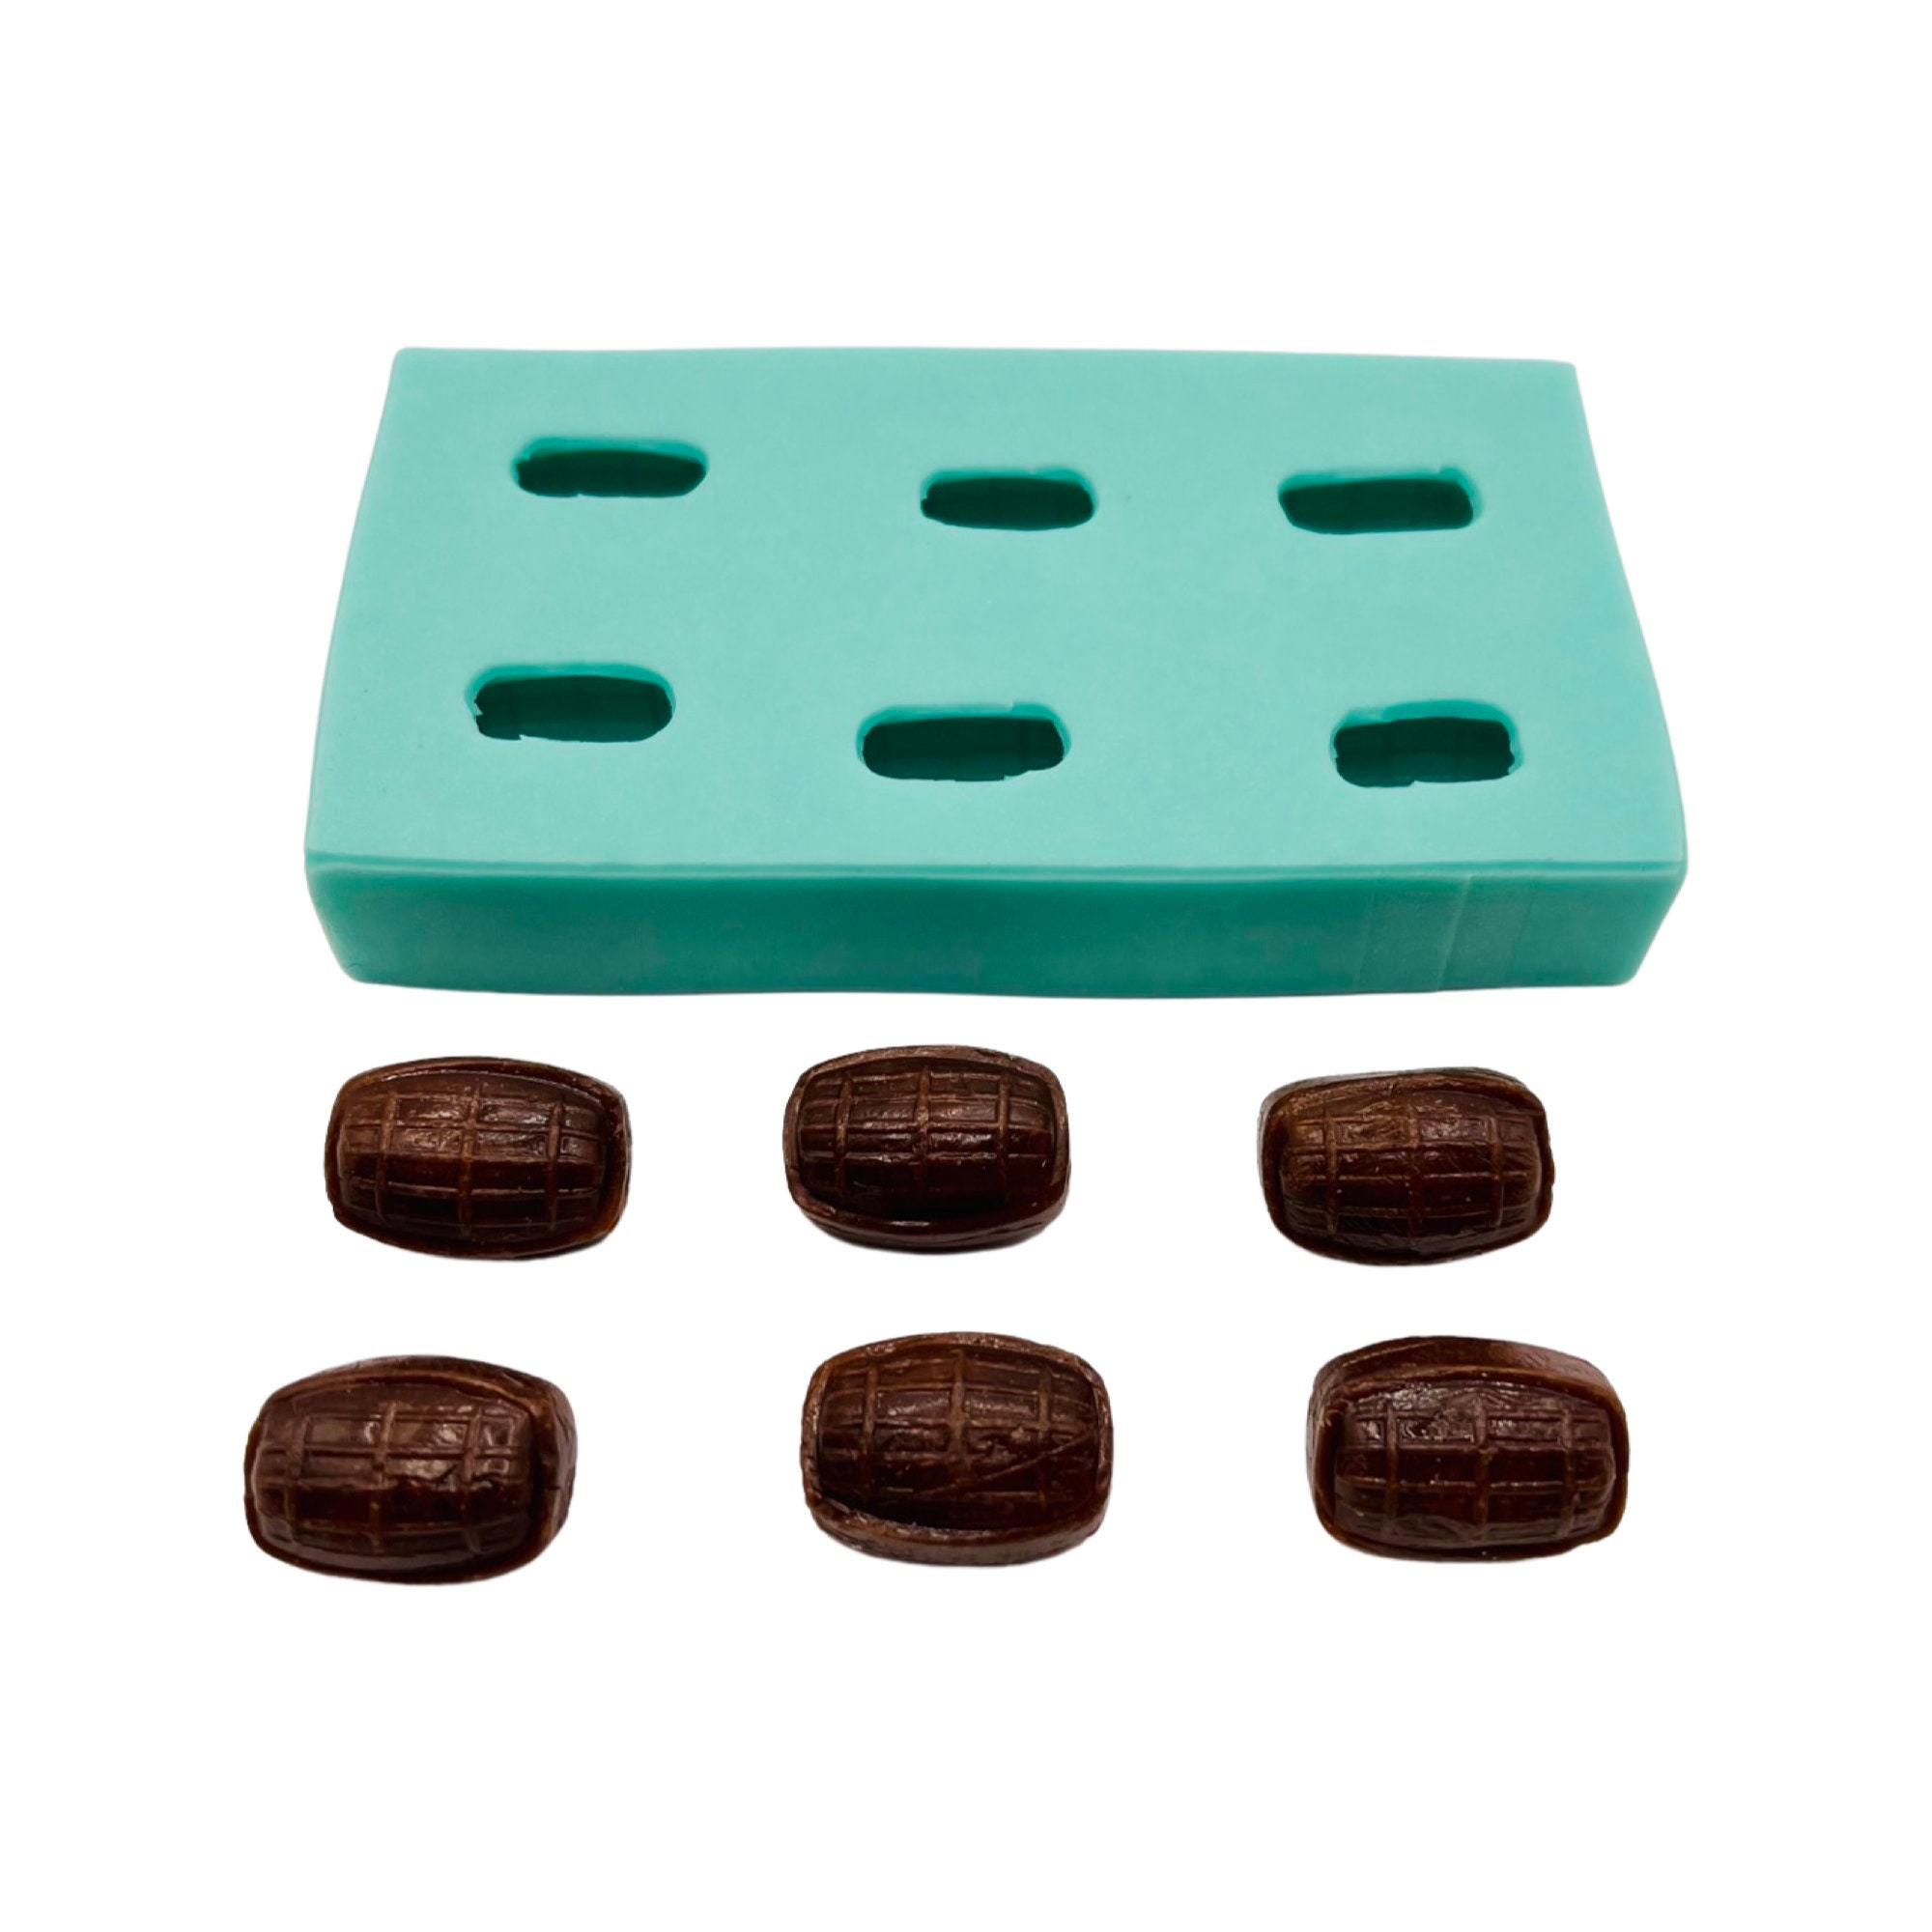 Reusable Musical Note Silicone Chocolate Molds DIY Making Mould Ice Cube  Trays Candies Making Supplies For Hard Candy Decoration From Woroto_, $0.46